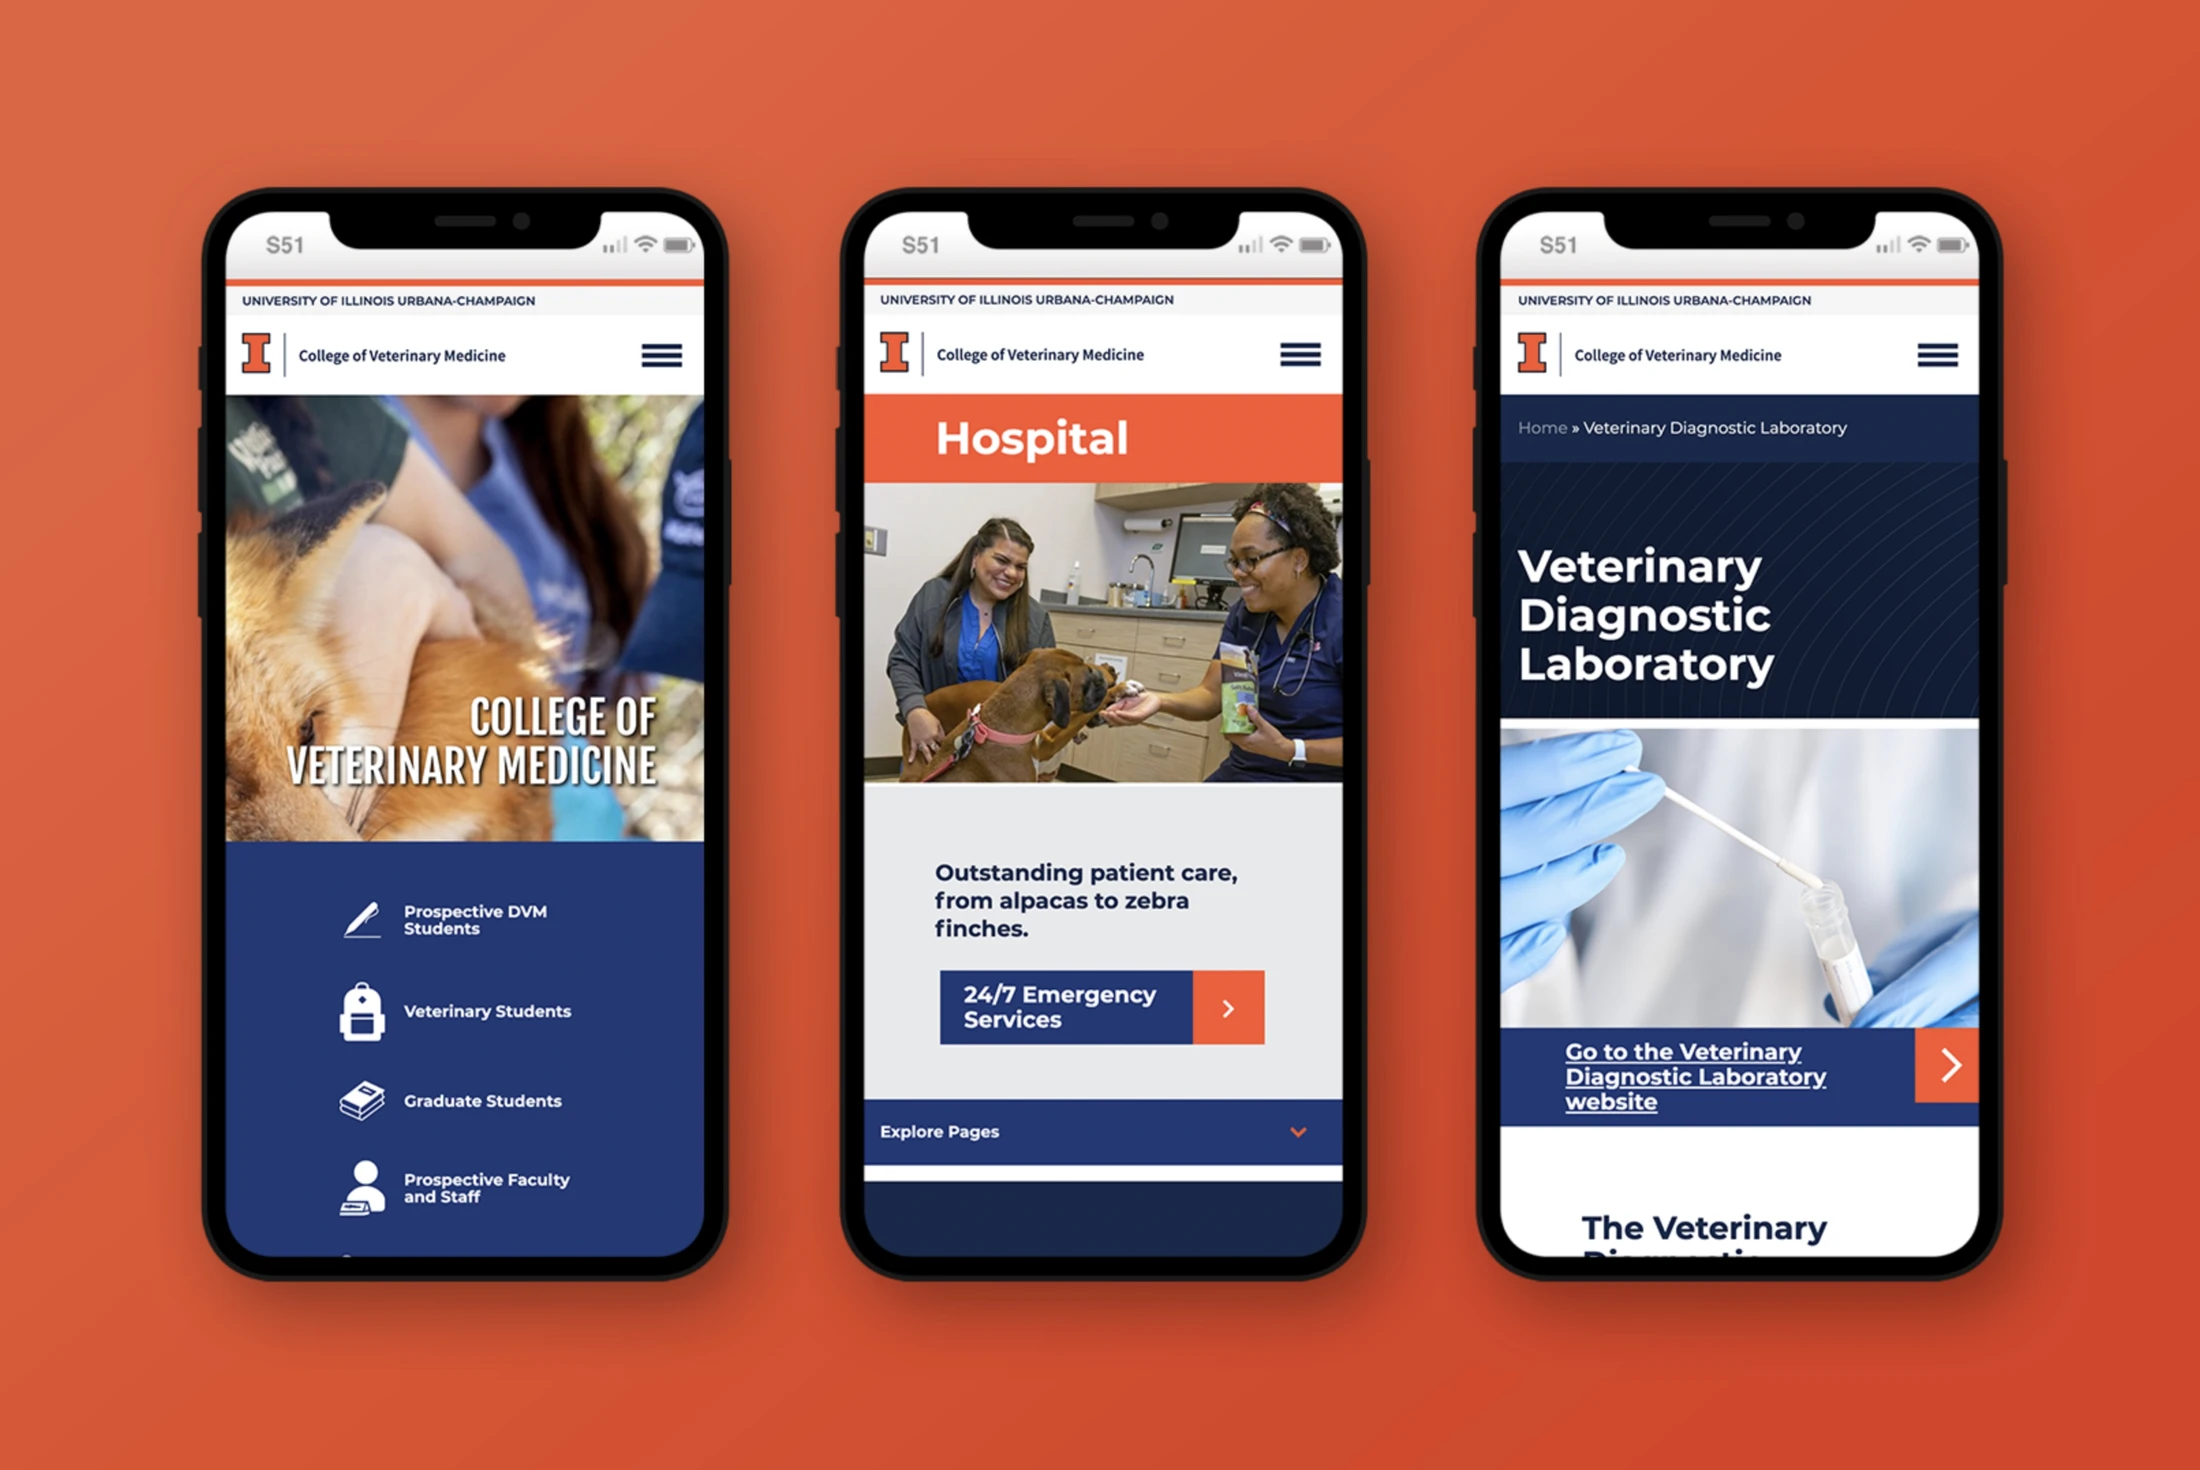 The website for a veterinary hospital is displayed on a mobile phone.